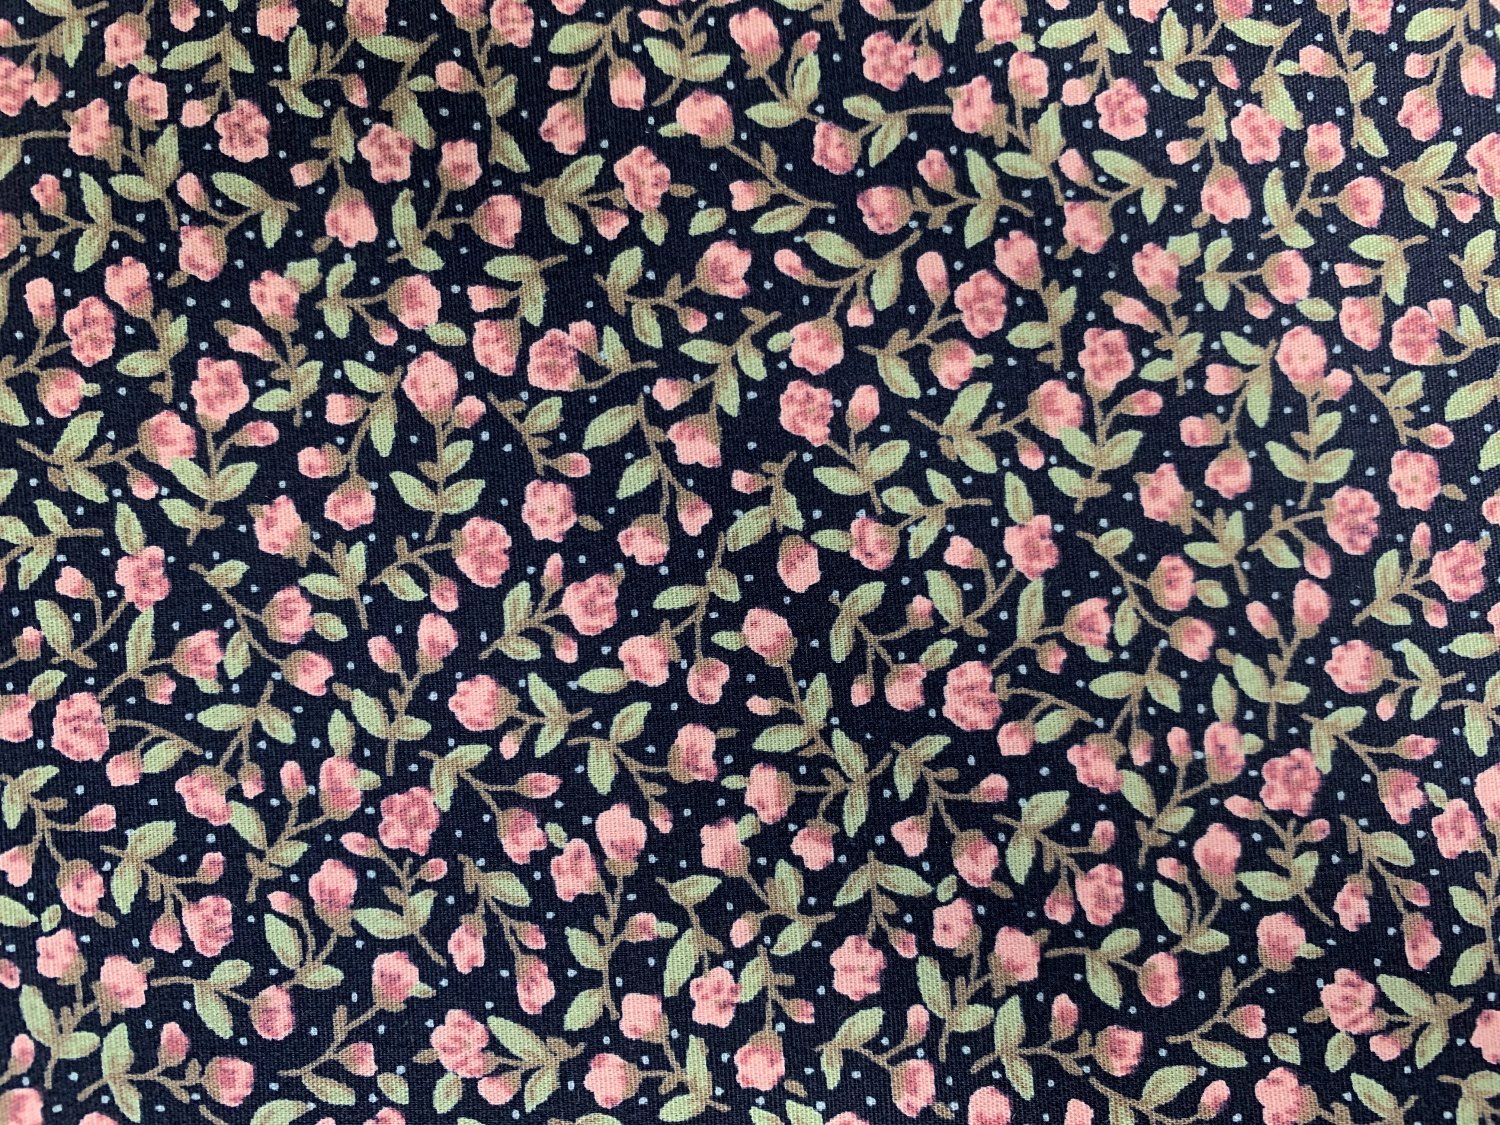 Floral Fabric ~ Ditsy Floral Print ~ Navy ~ 100% Cotton Poplin Fabric